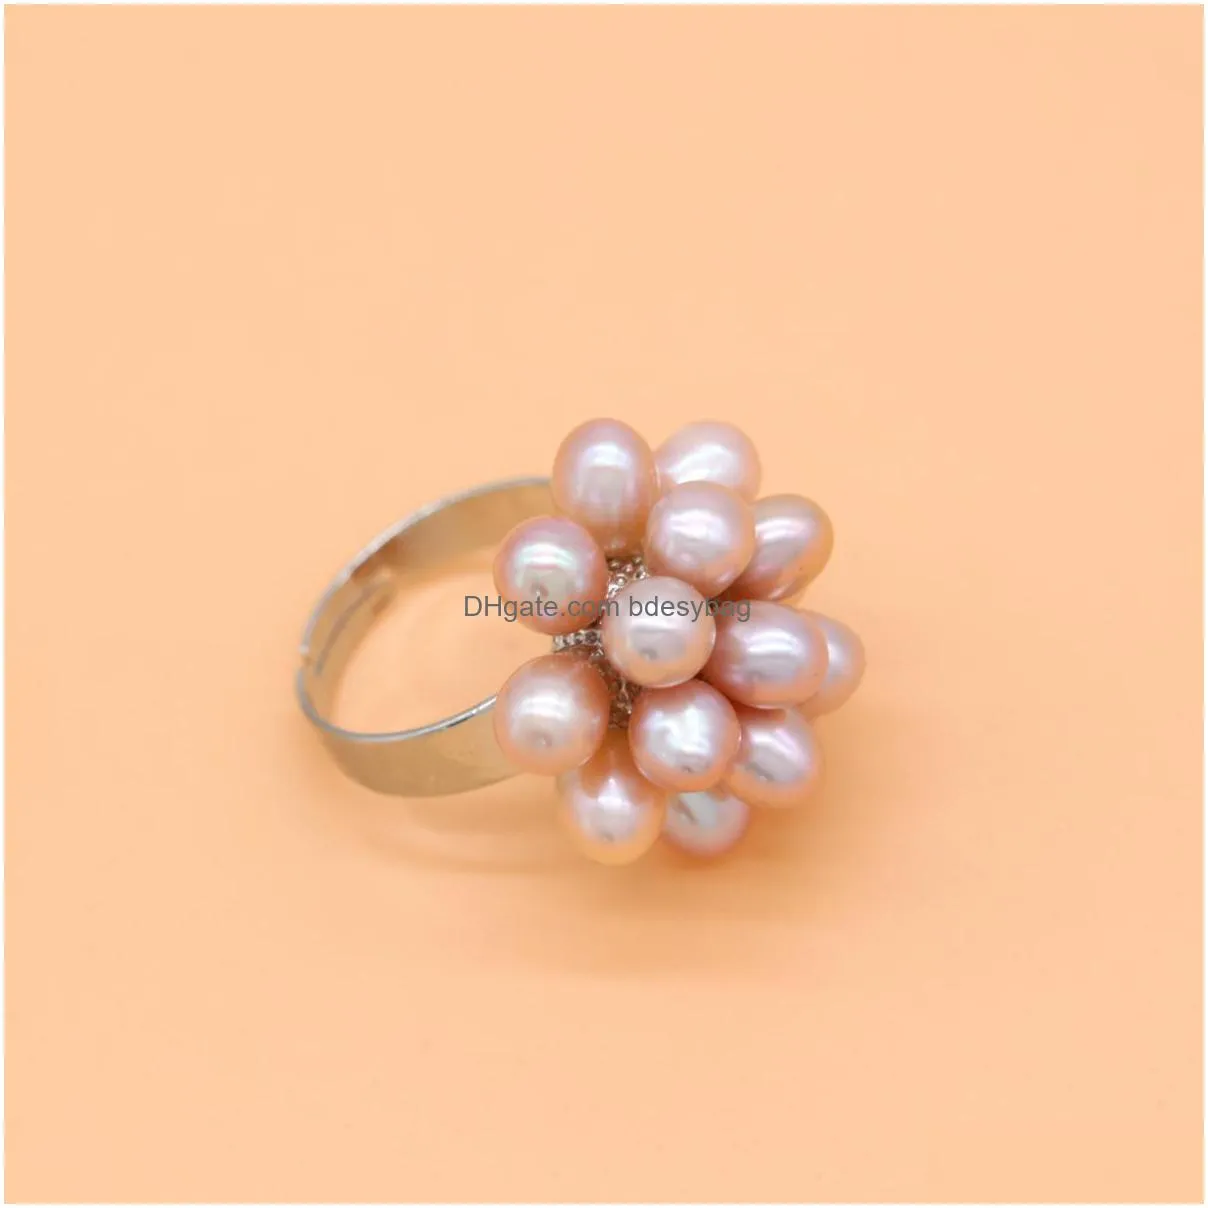 5 pcs rice pearl cluster ring freshwater pearls rings natural color white pink black fashion women jewelry love wish best